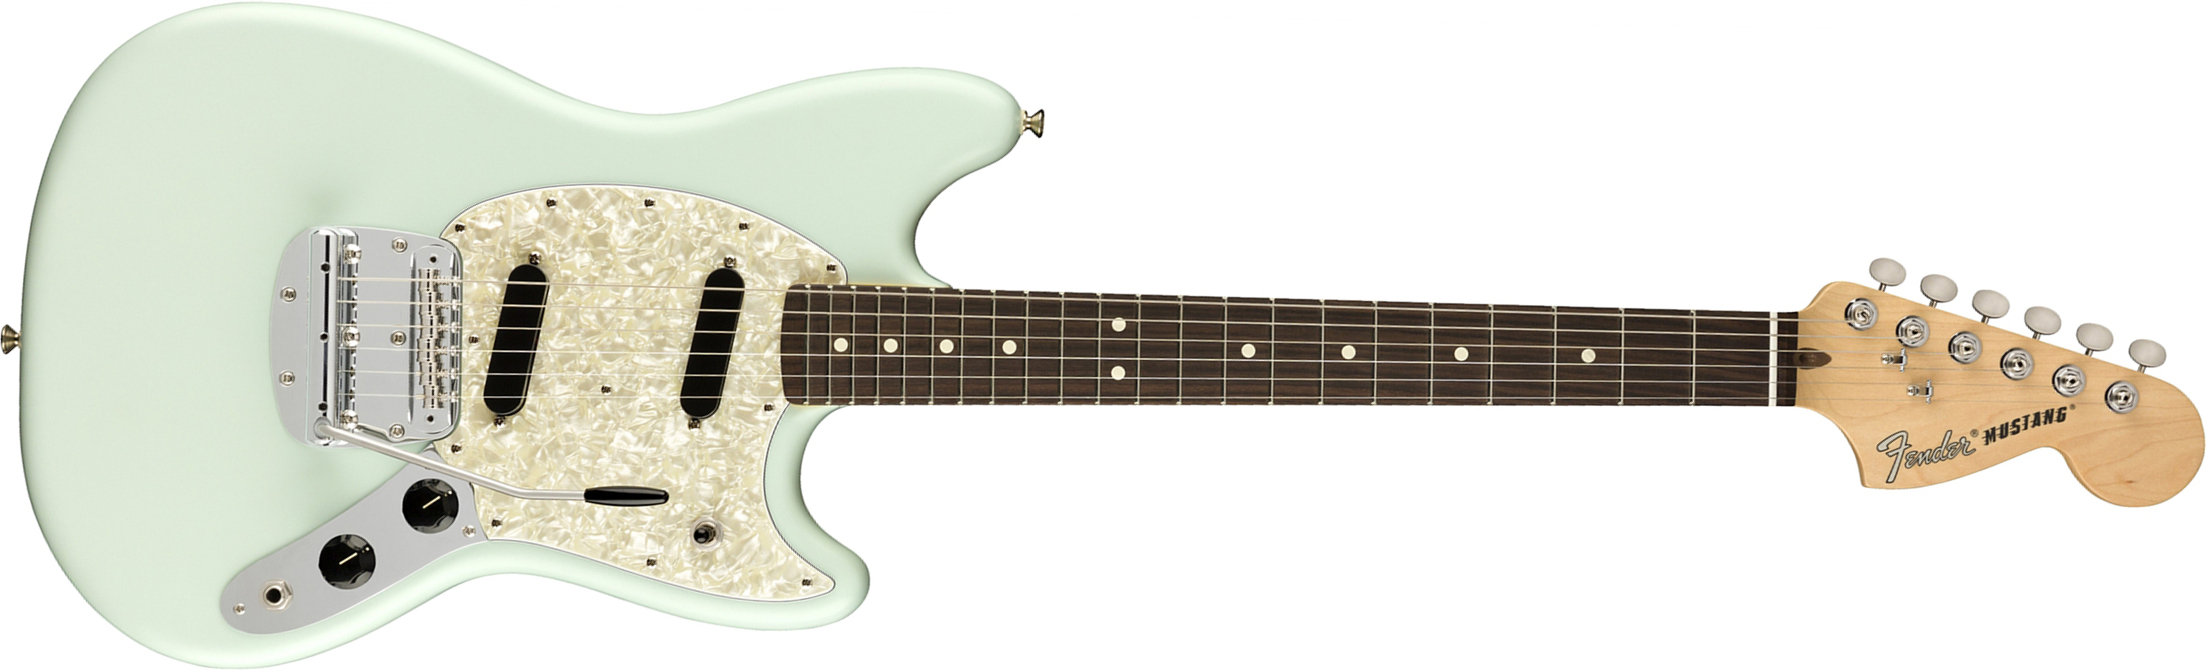 Fender Mustang American Performer Usa Ss Rw - Satin Sonic Blue - Double Cut E-Gitarre - Main picture